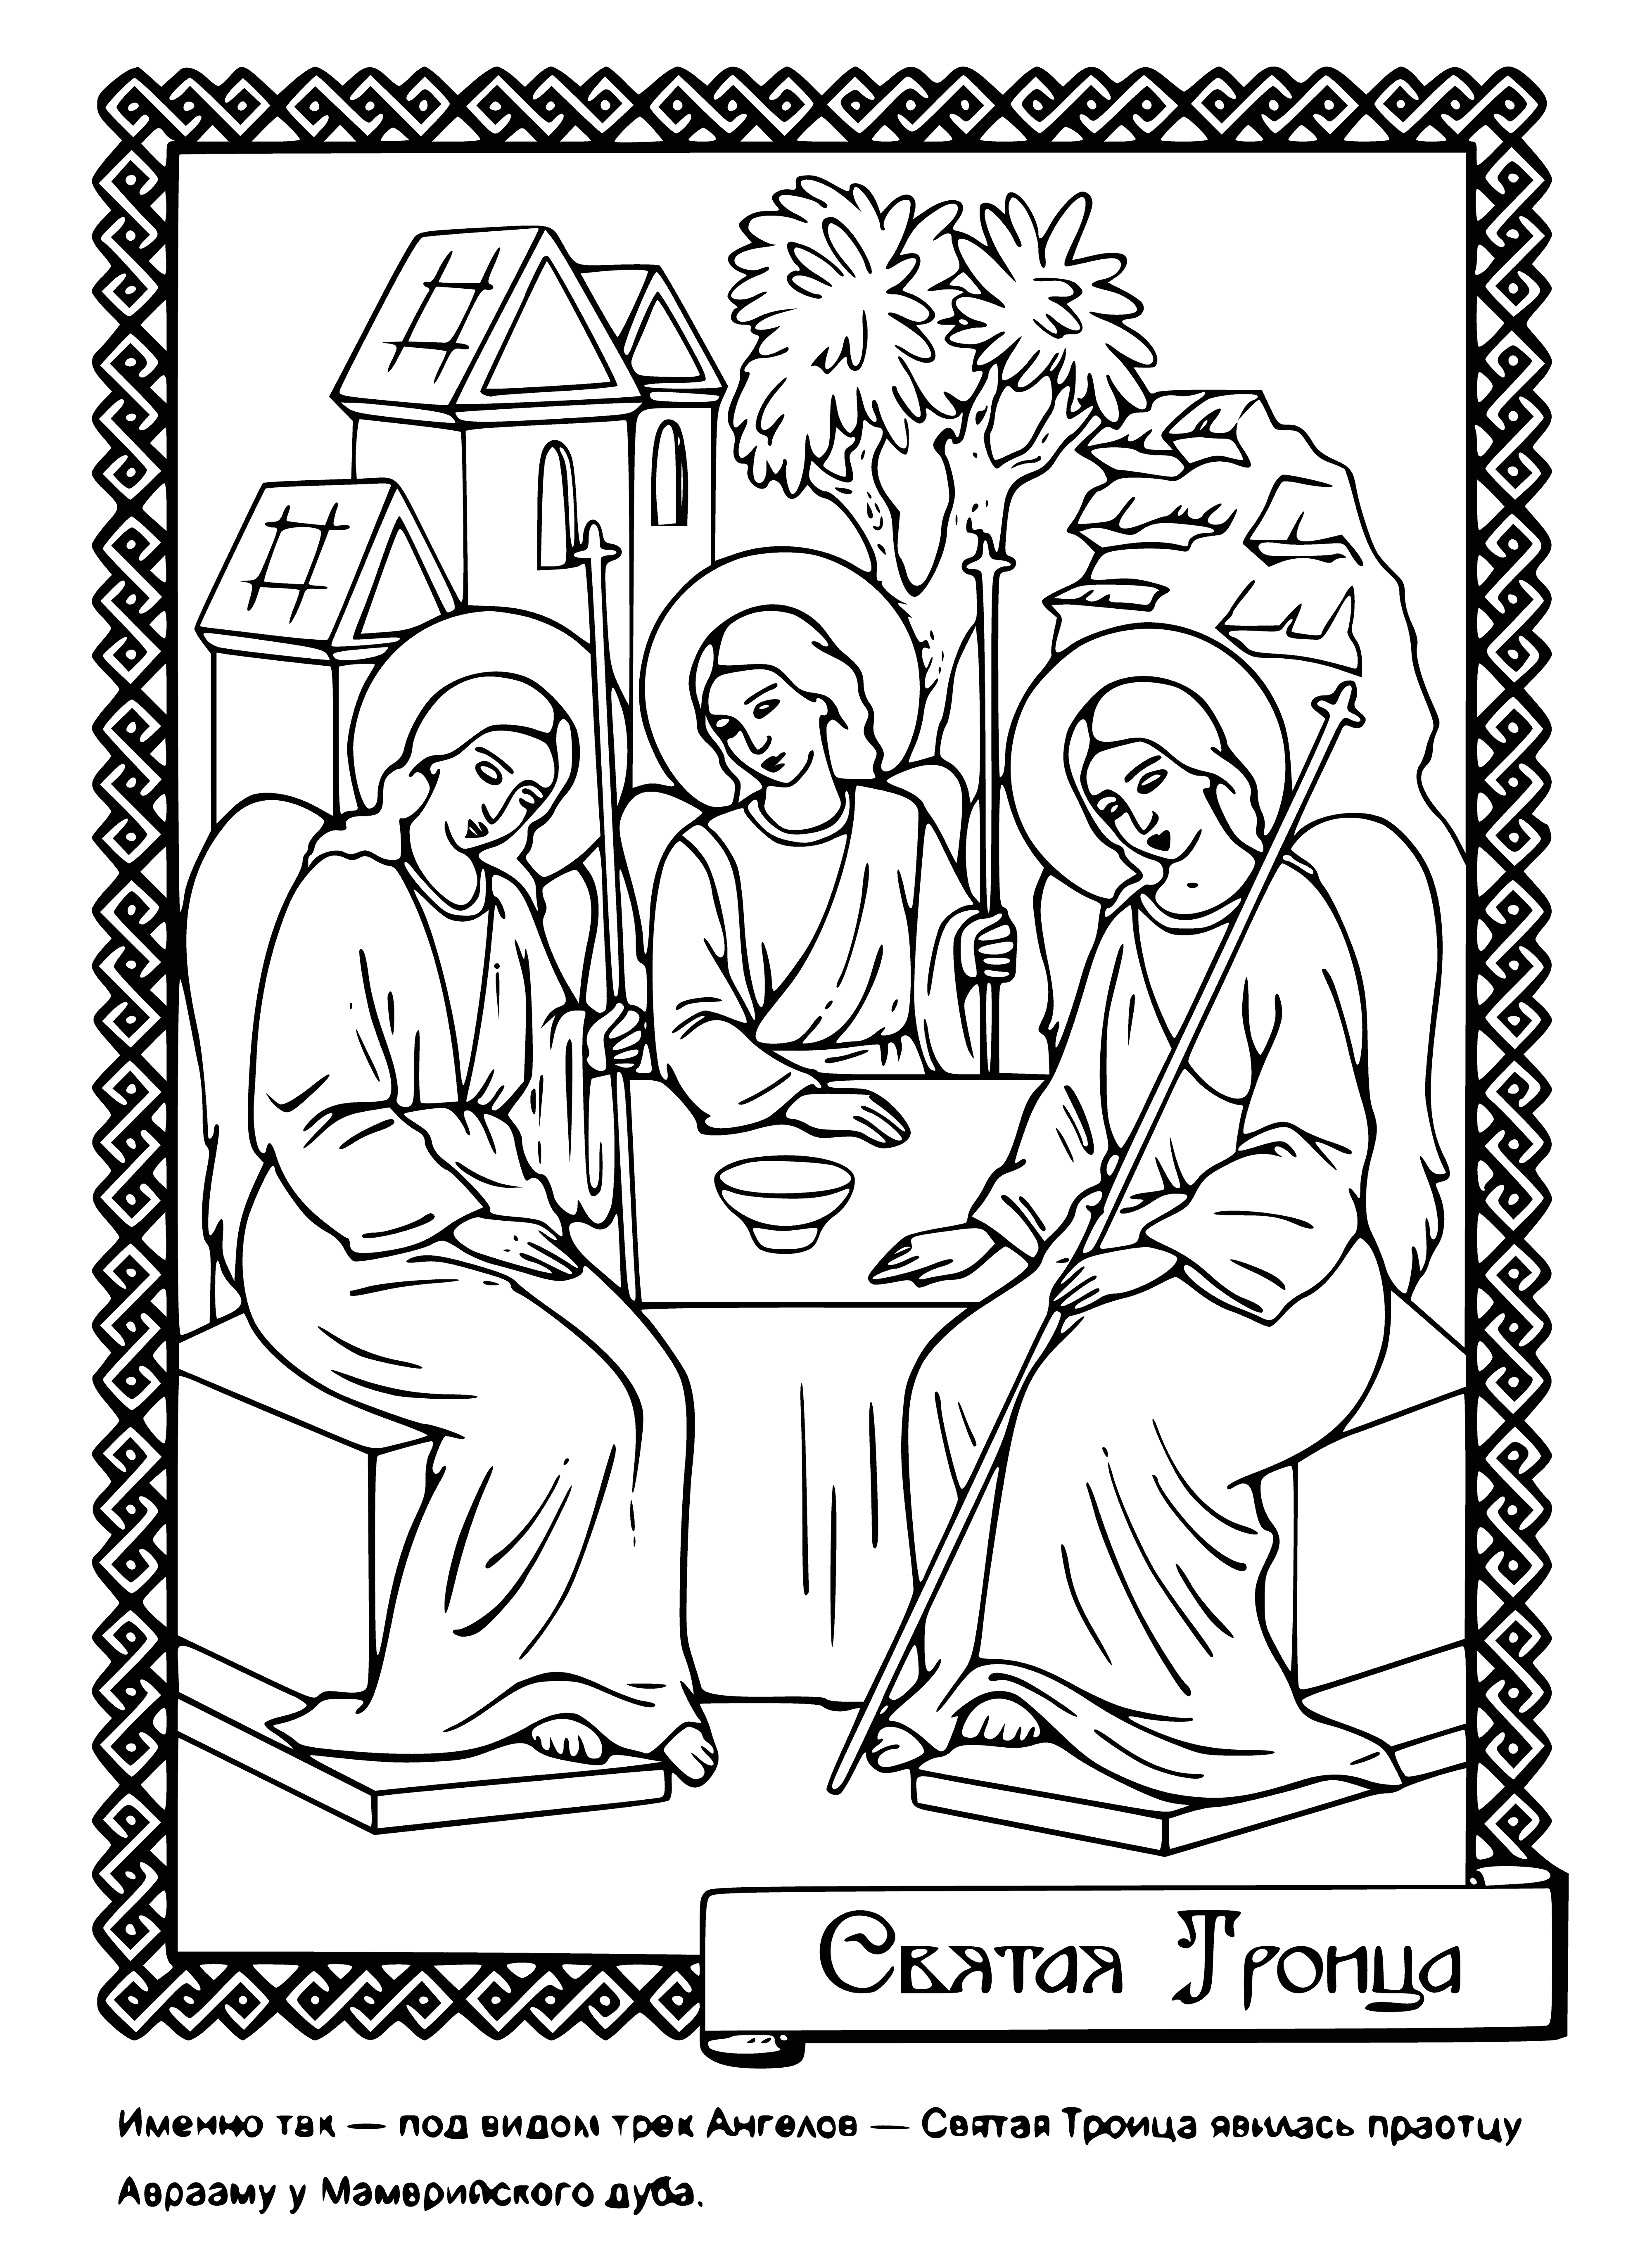 coloring page: People gather around a table with bread, wine, and fruit; smiling and content. #Gathering